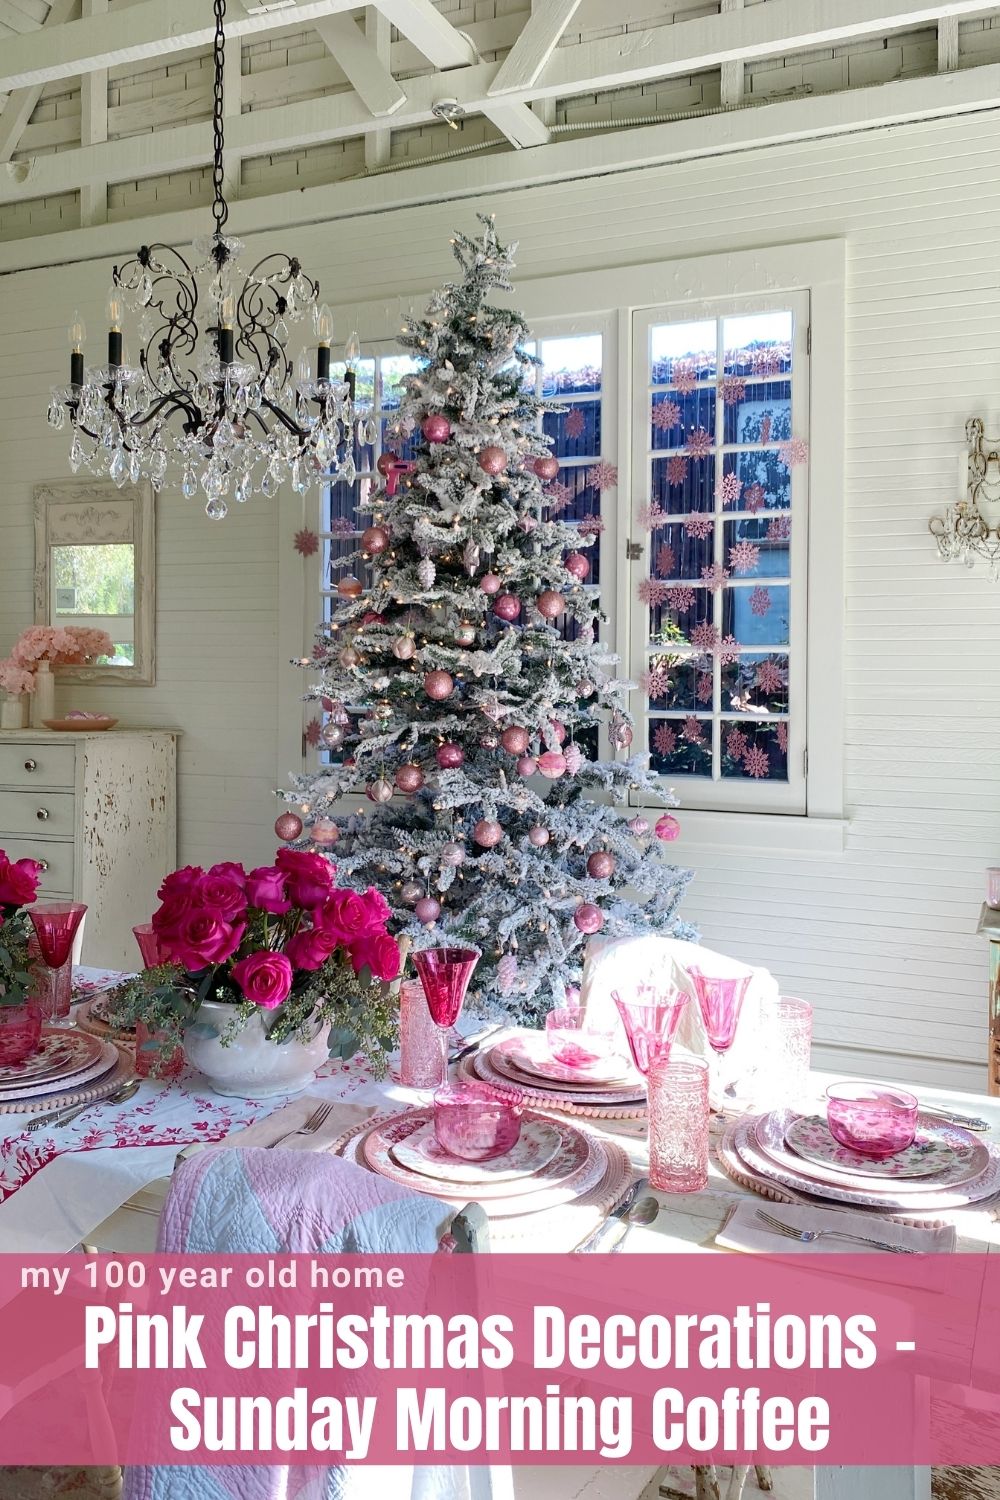 The Carriage House is now fully decorated in pink and white and I cannot wait to share our Pink Christmas decorations.